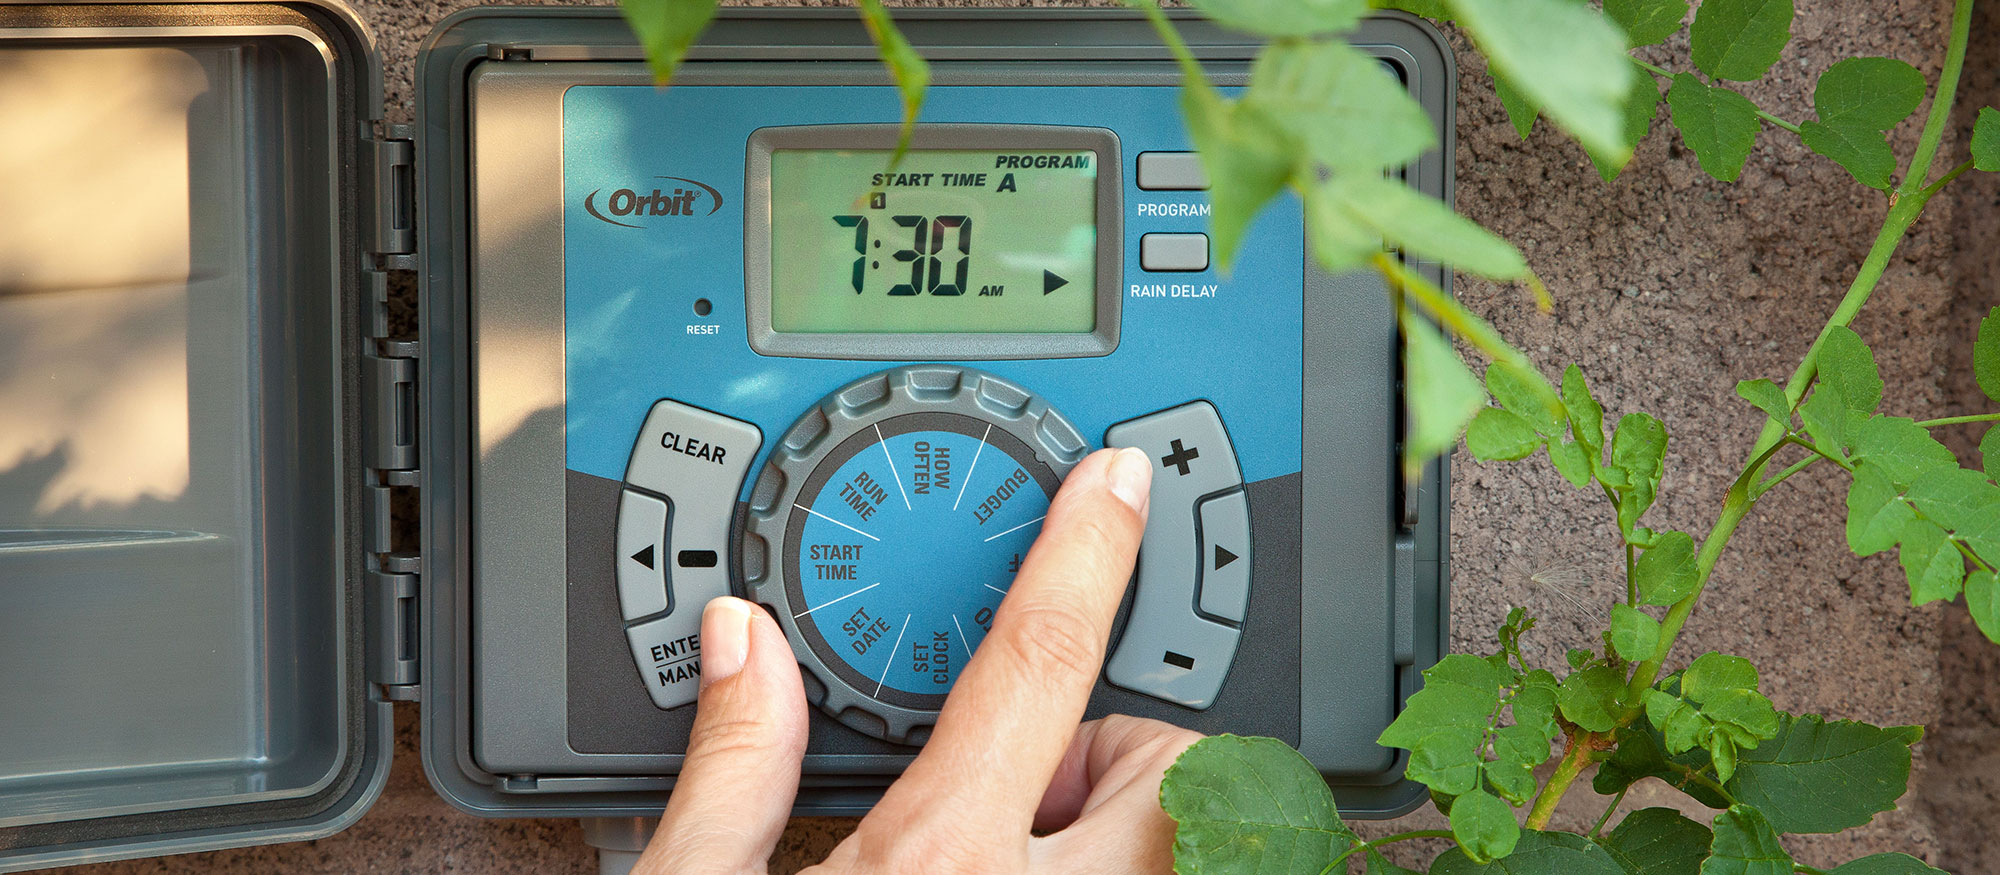 Hand turns dial on irrigation clock